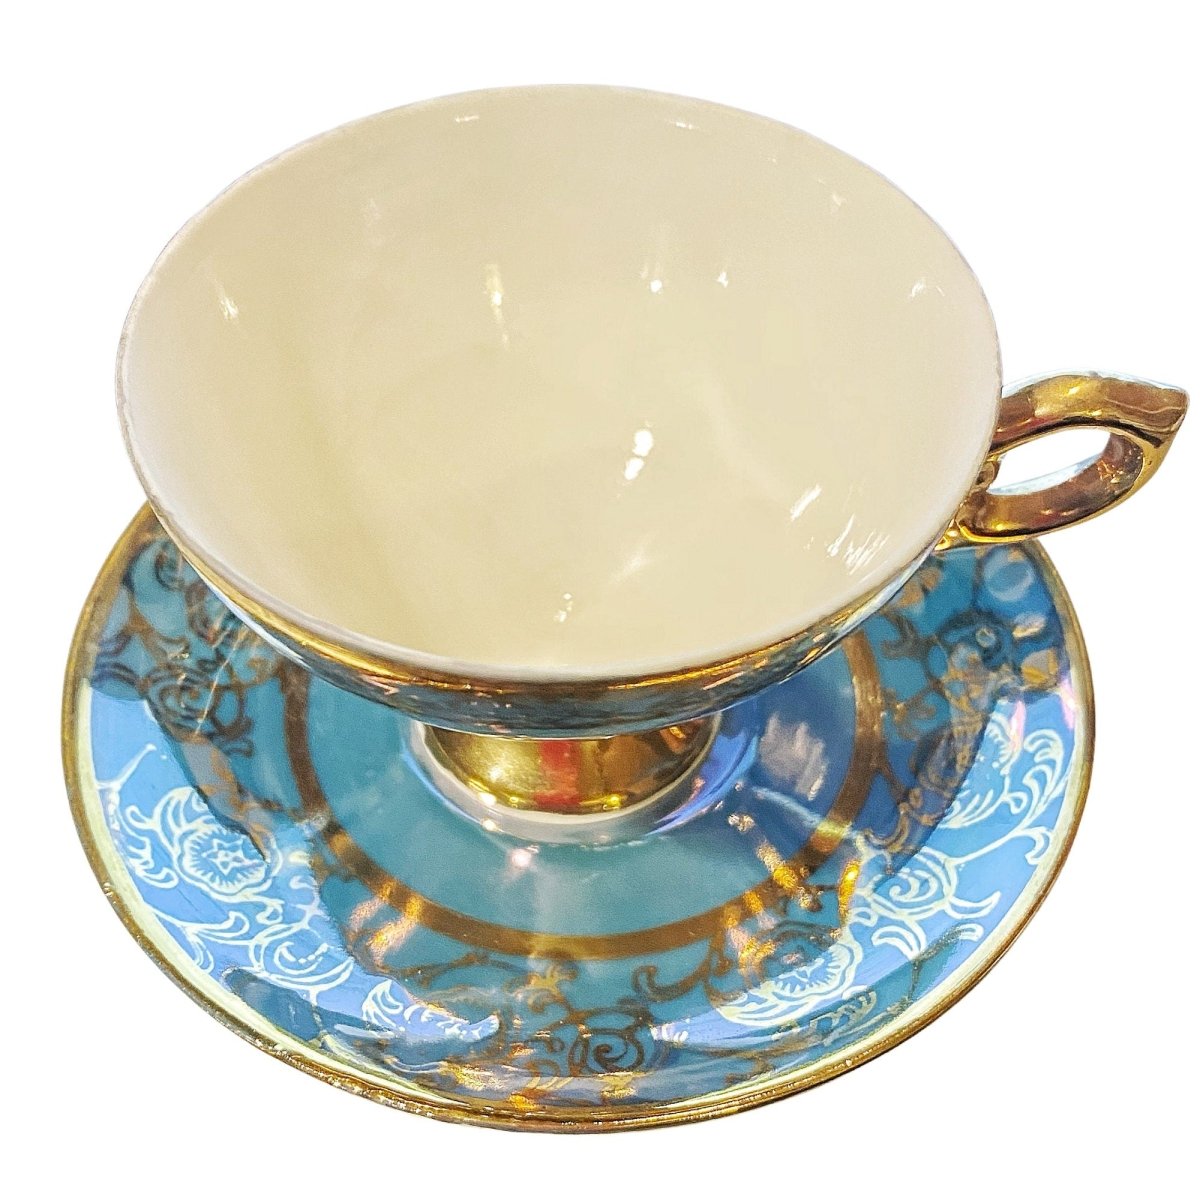 Lusterware | Olive Green | Pedestal Footed Mocha Cup with Golden Flower & Vine Decoration Around the Rim - Chinamania.shop